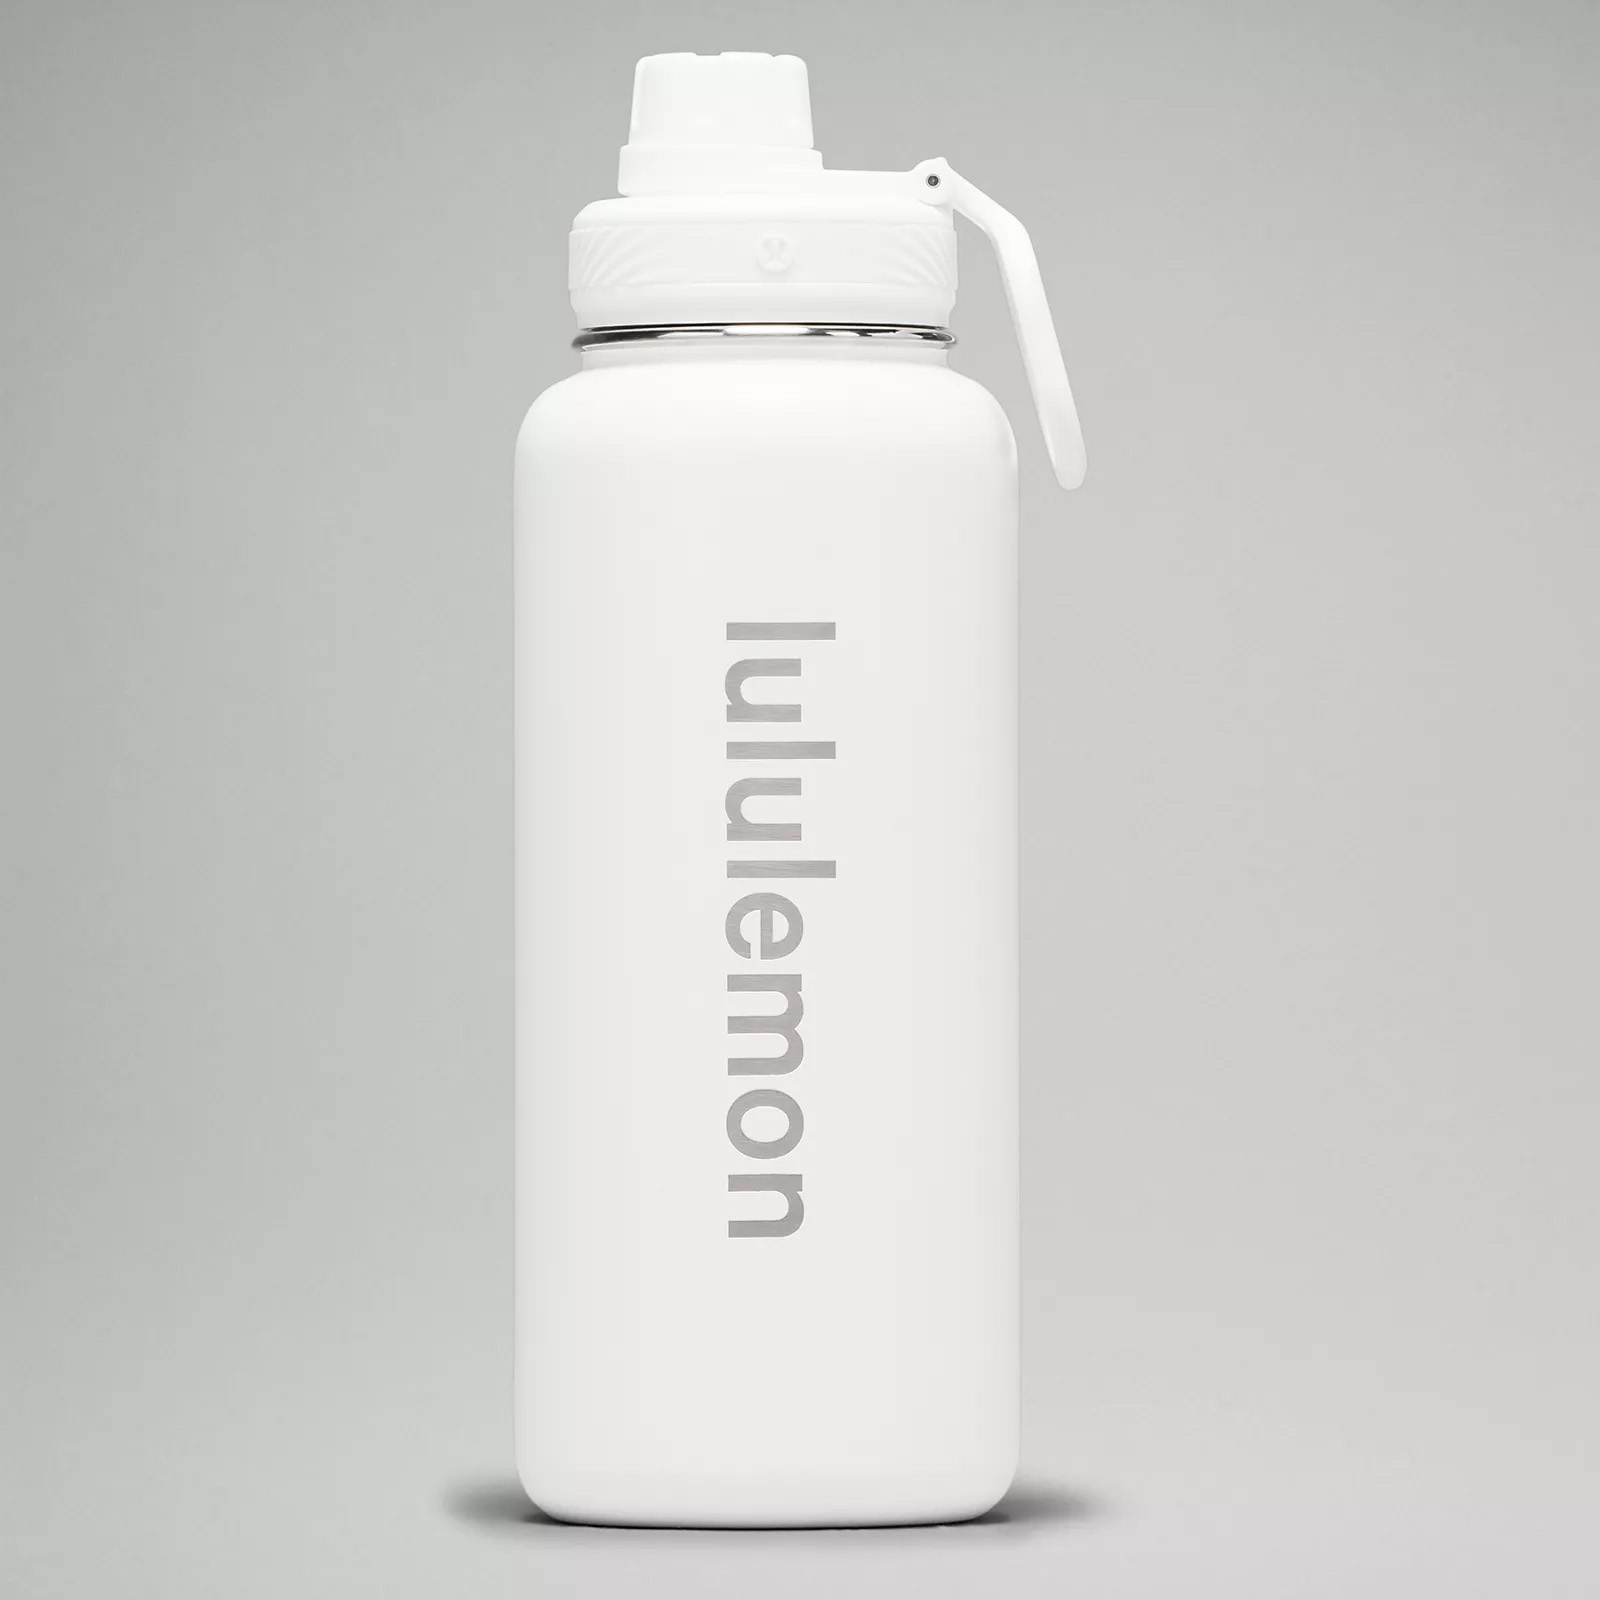 Lululemon Back to Life Sport Bottle in all white with lid and carry accessory